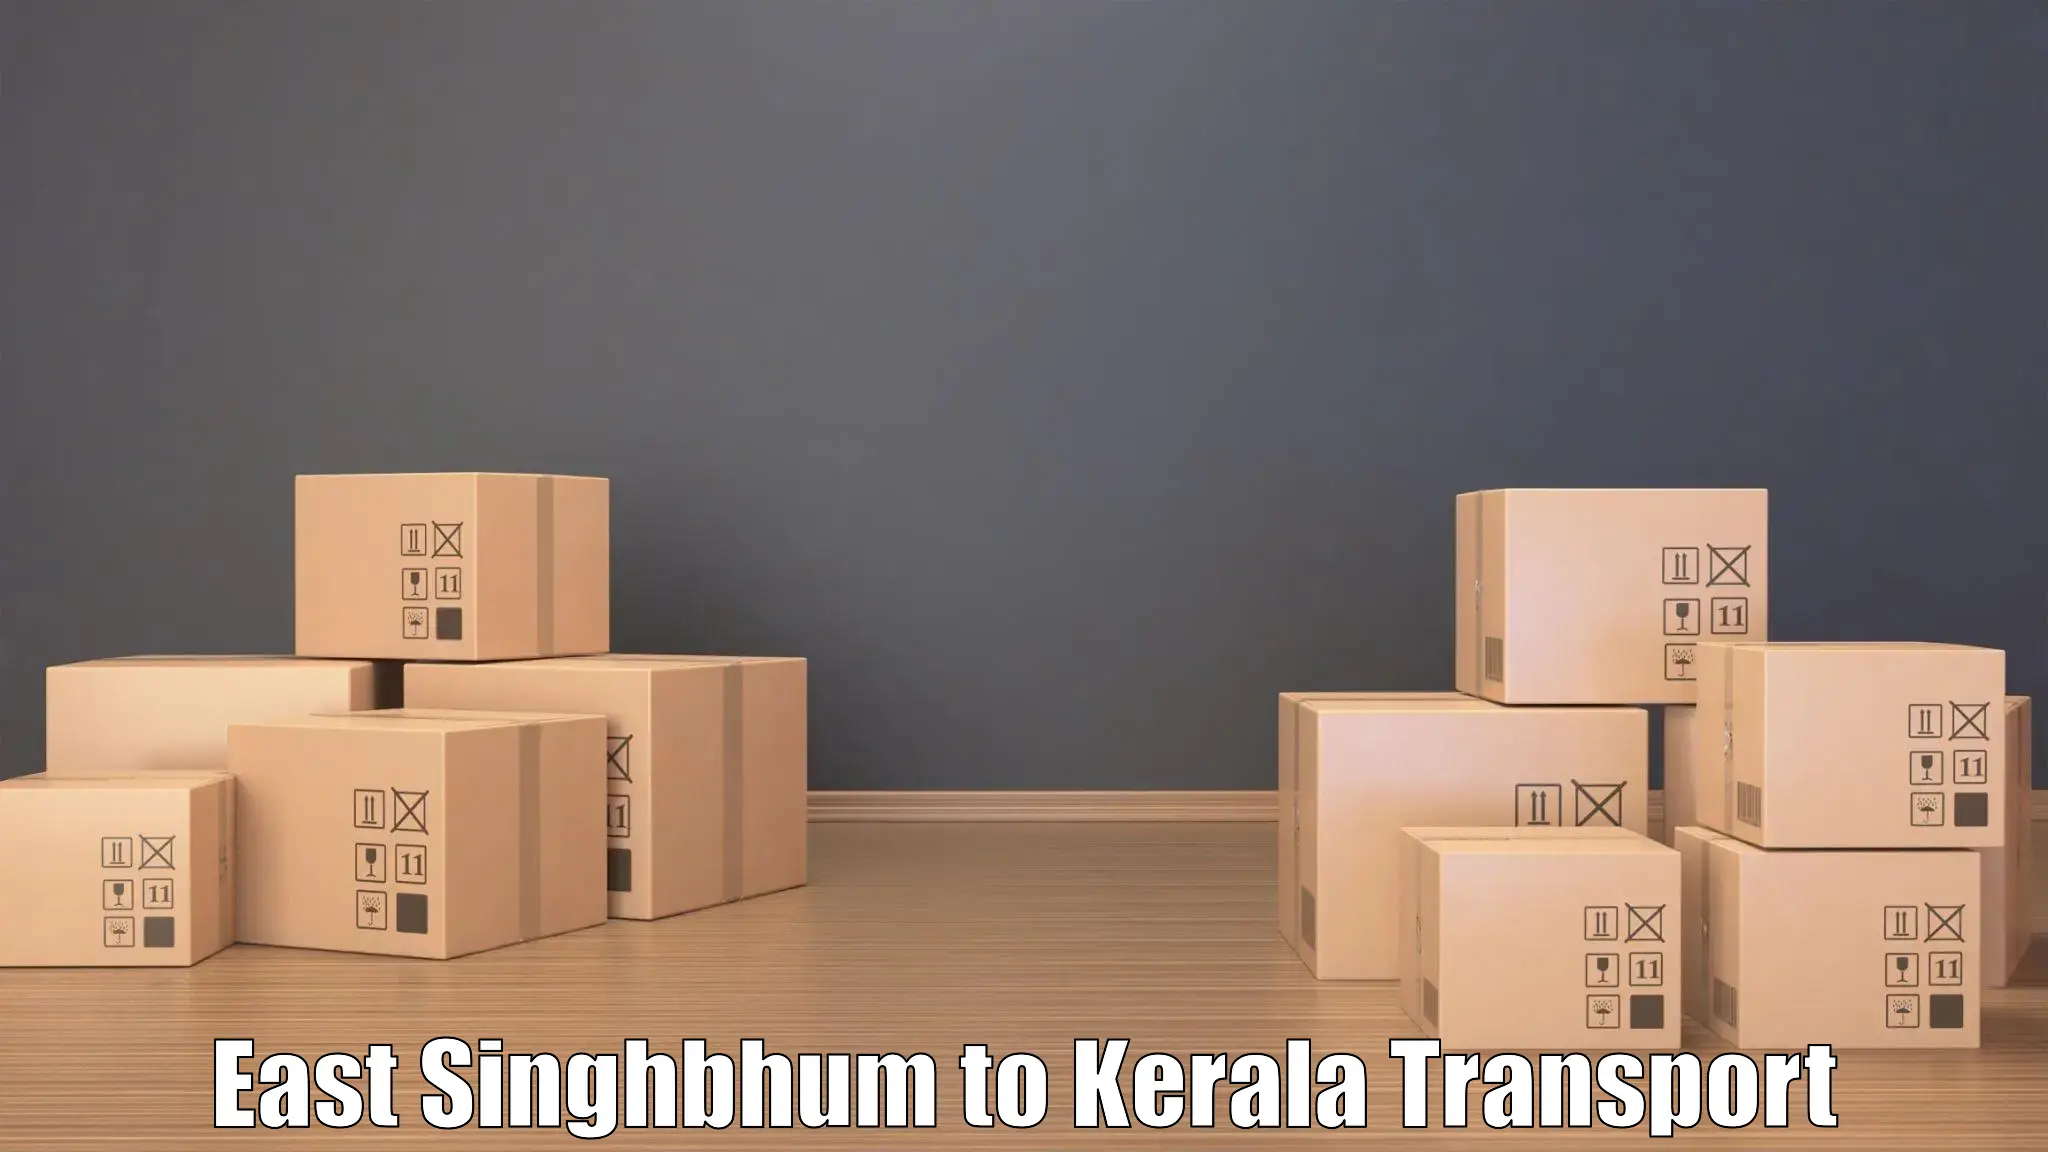 Shipping partner East Singhbhum to North Paravur